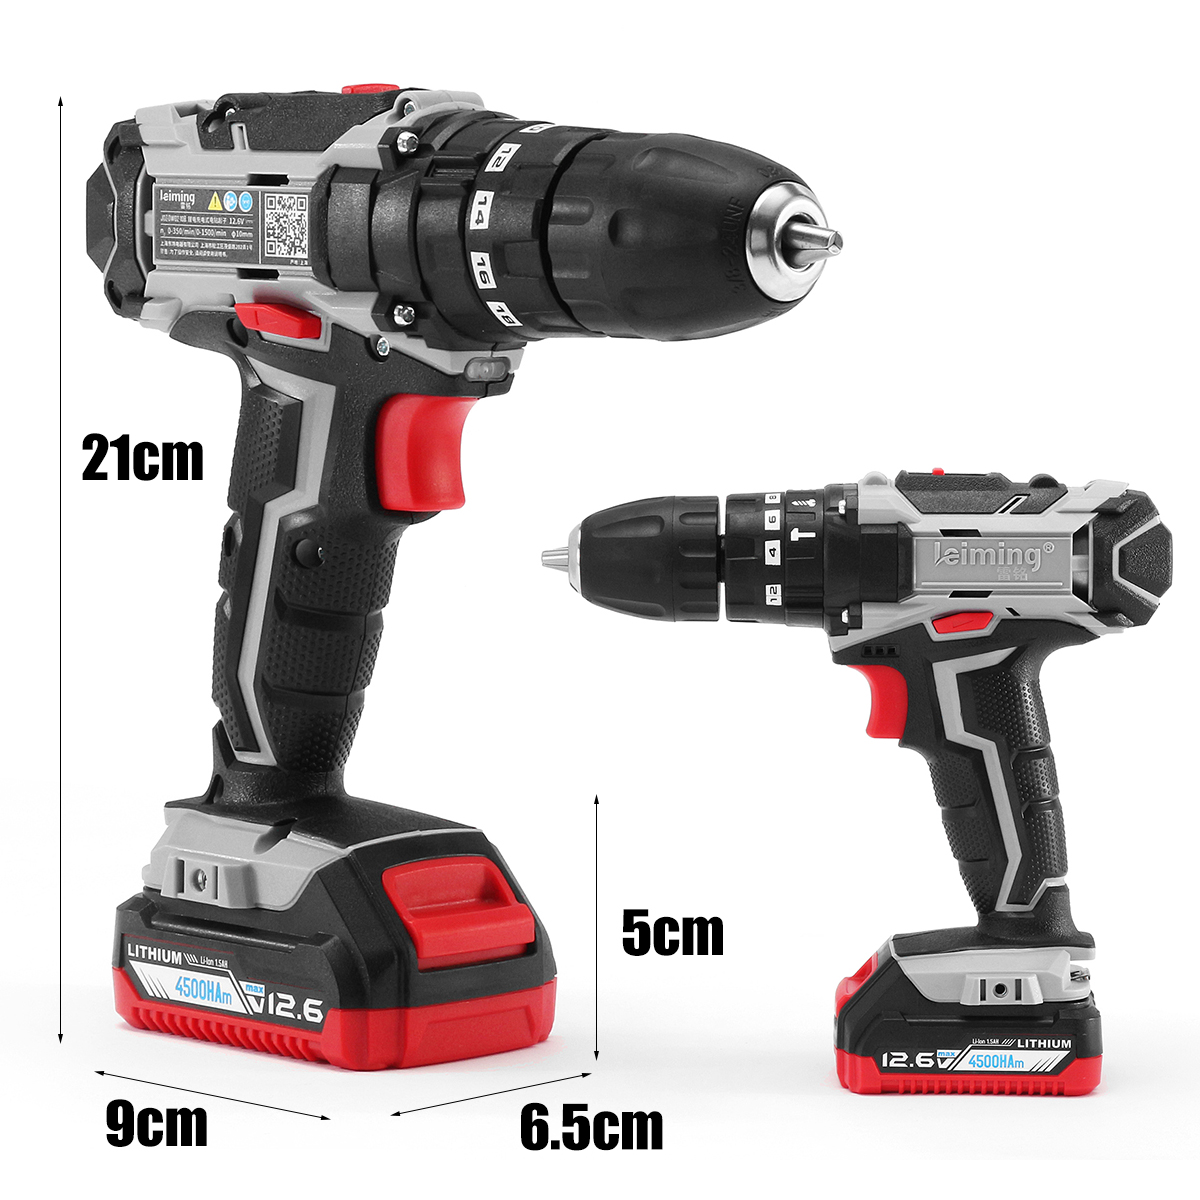 126V-Li-ion-Battery-Electric-Screwdriver-Cordless-Rechargeable-Power-Drill-with-LED-light-1297752-8